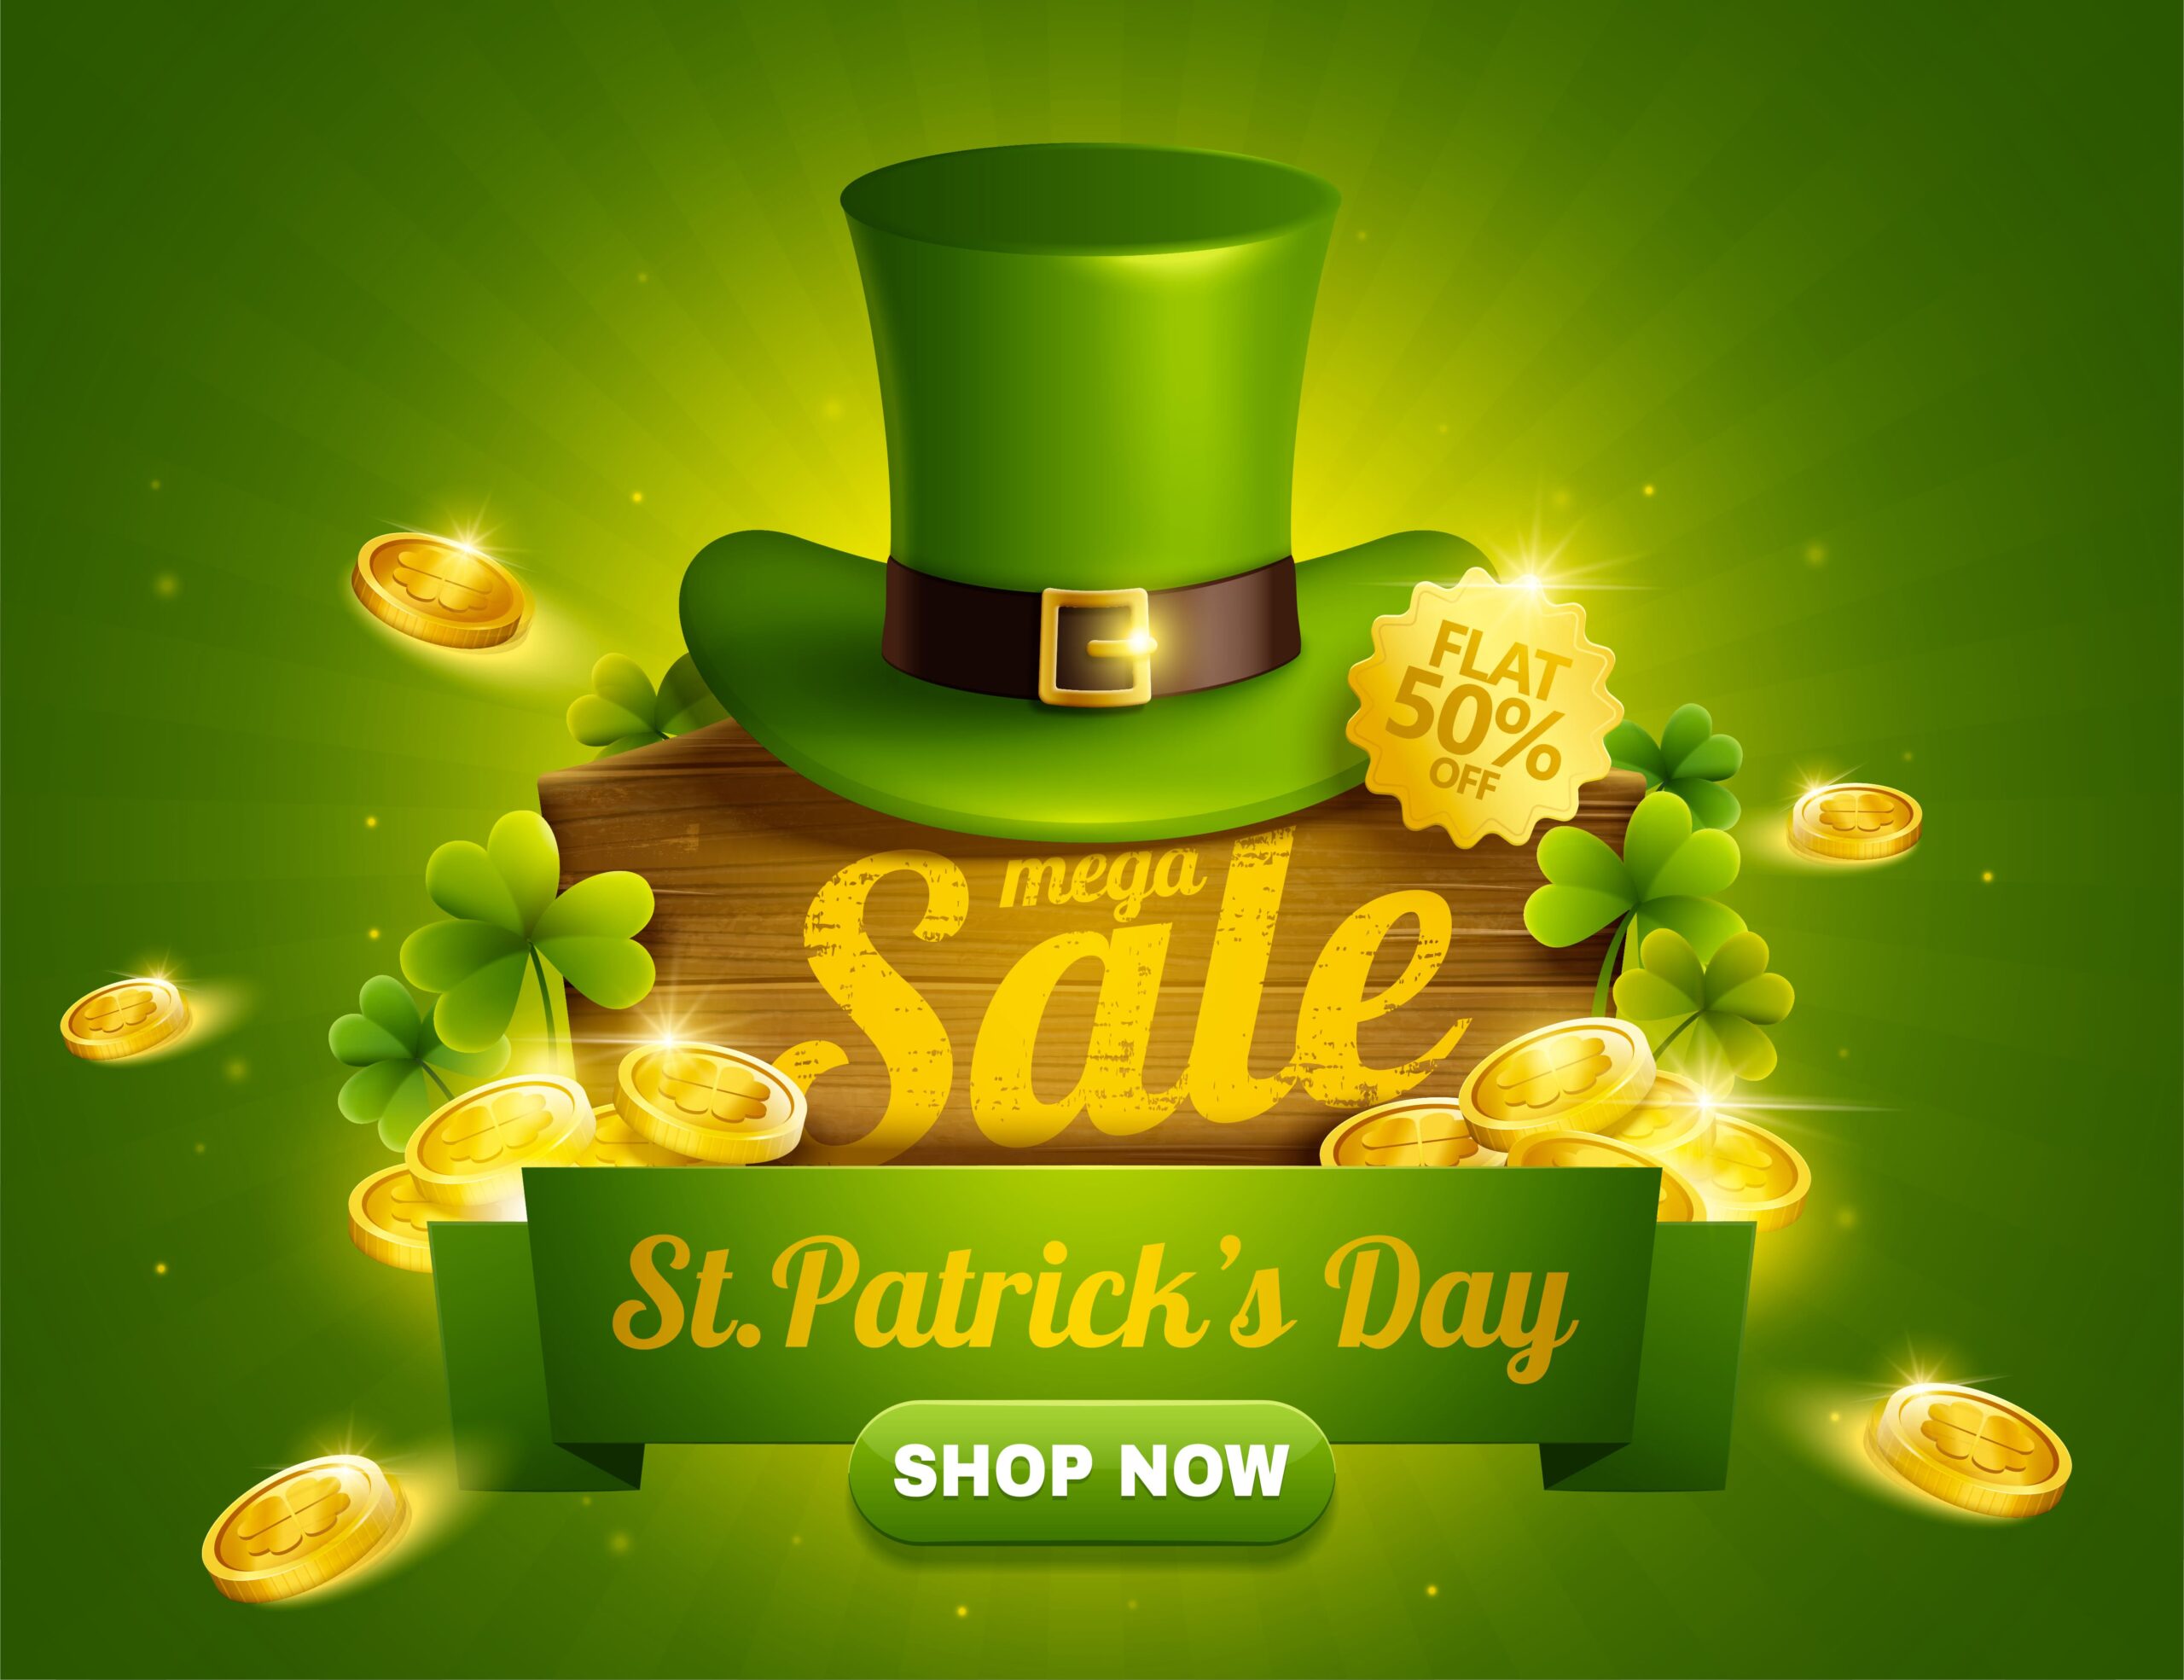 6 Advertising Tips For Retailers Looking To Cash In On St. Patrick’s Day